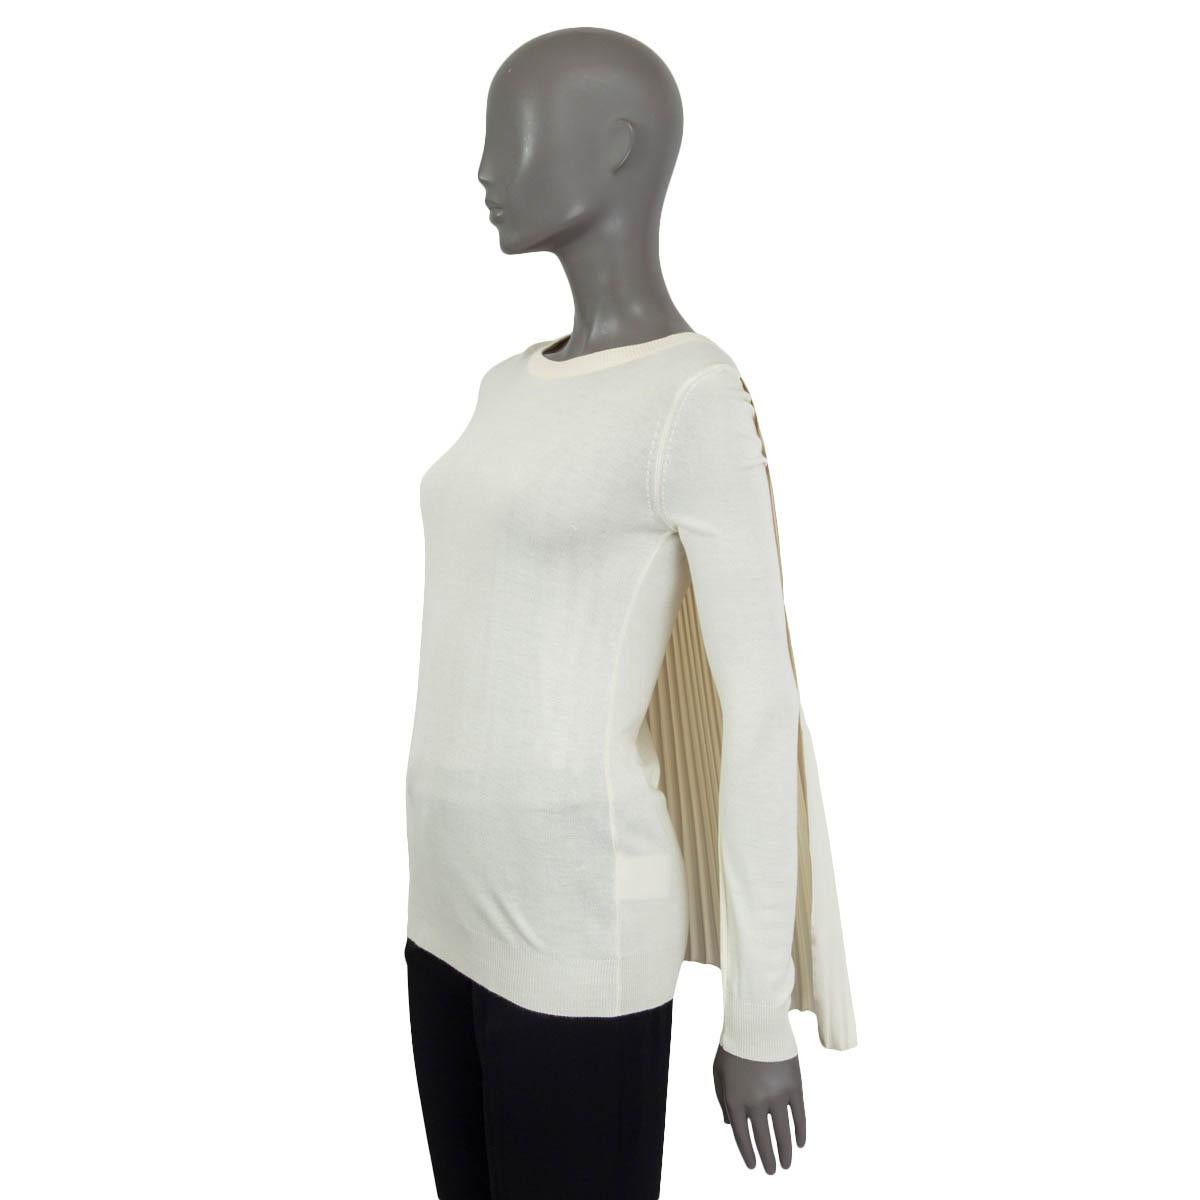 MAISON MARTIN MARGIELA ivory viscose PANELED CAPE Sweater S In Excellent Condition For Sale In Zürich, CH